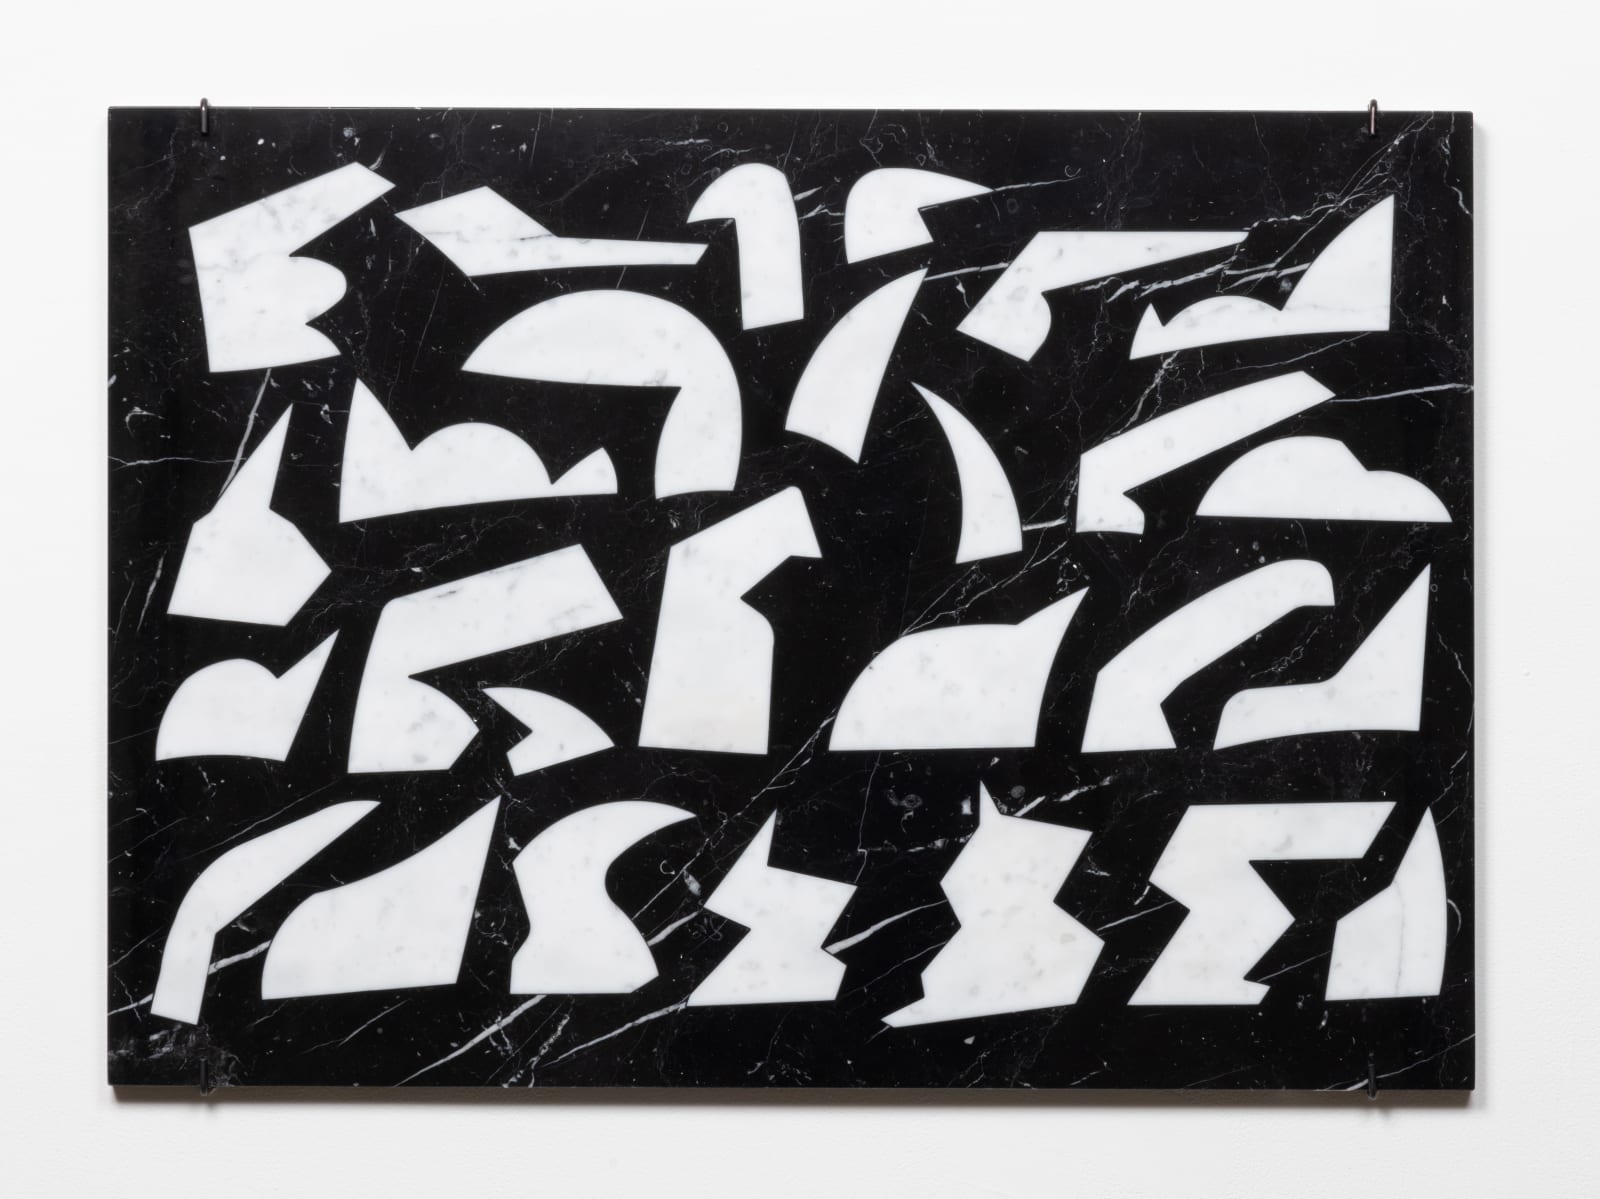 Wall-mounted, black rectangular marble slab inlaid with several white marble shapes resembling abstract bird-like forms with beaks.